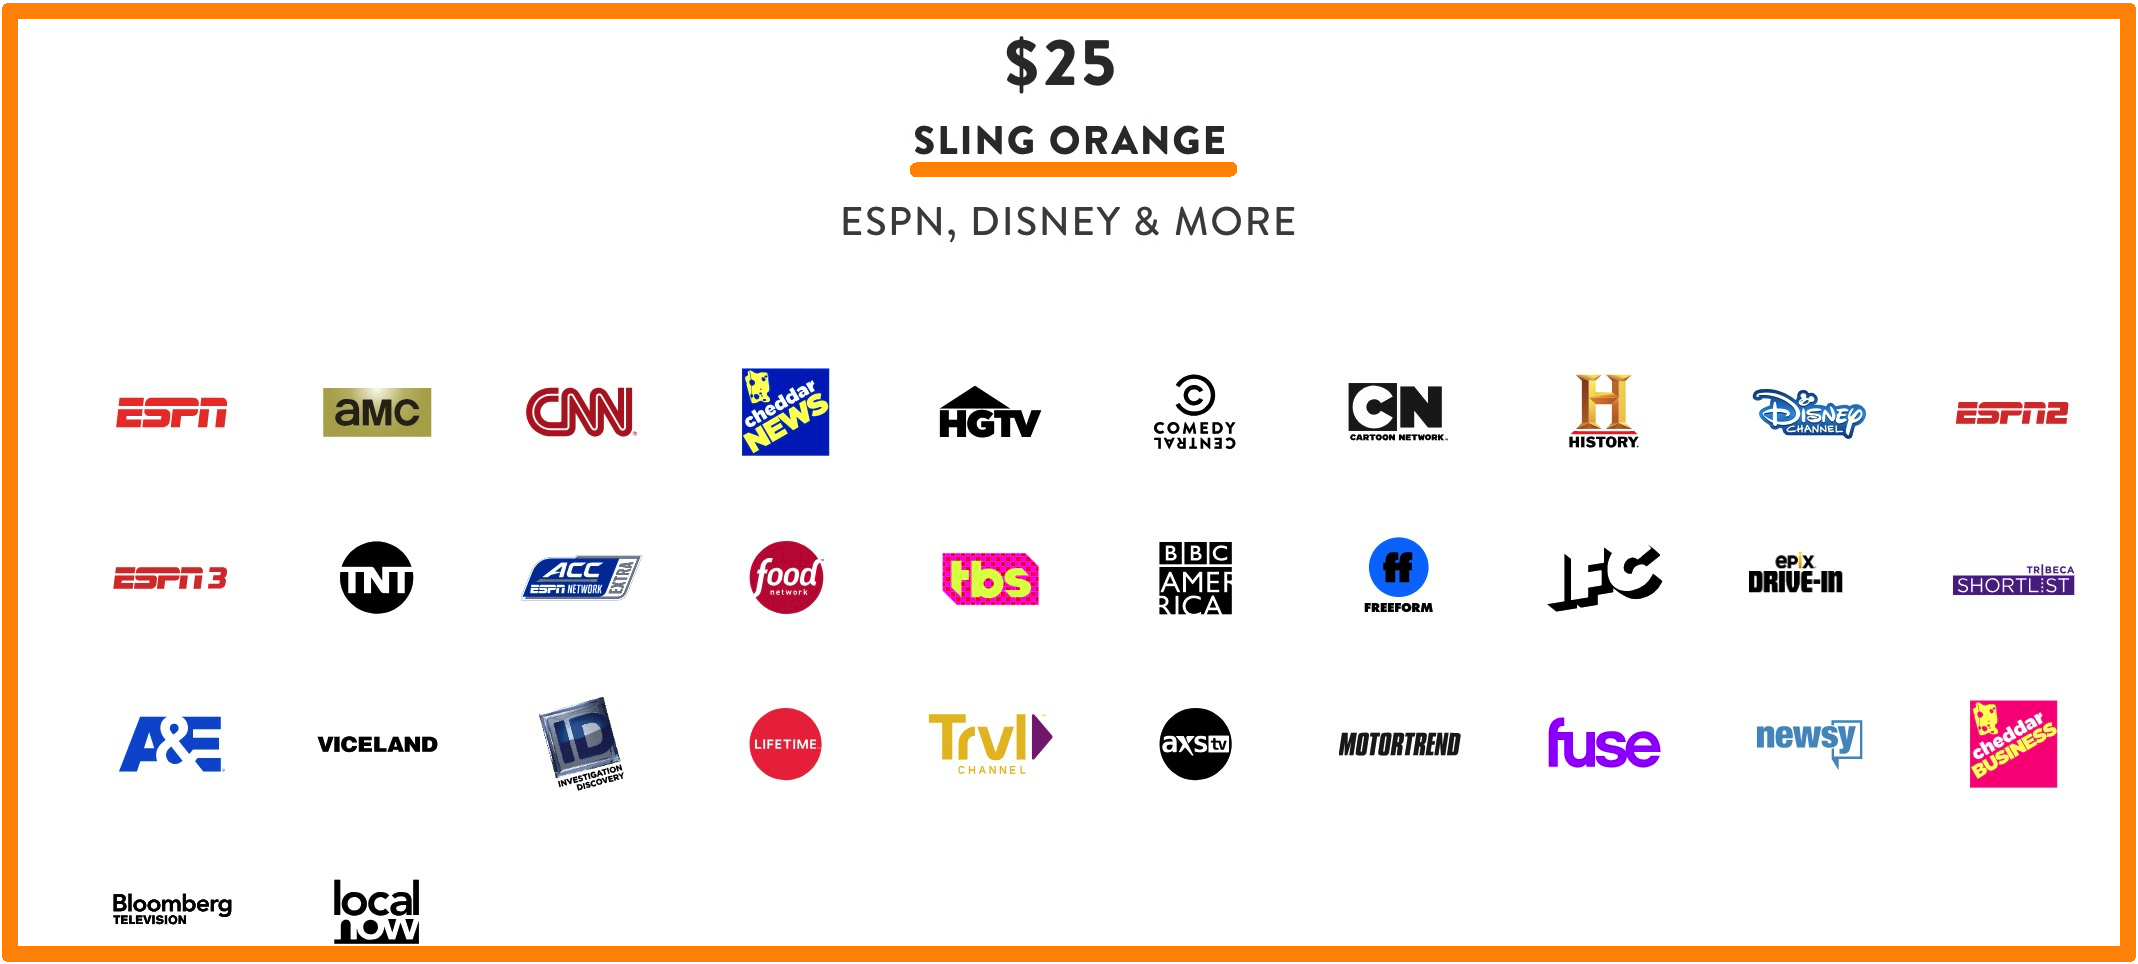 Sling TV Packages: What’s the Best Value? - What Channels Do You Get With Amc Plus